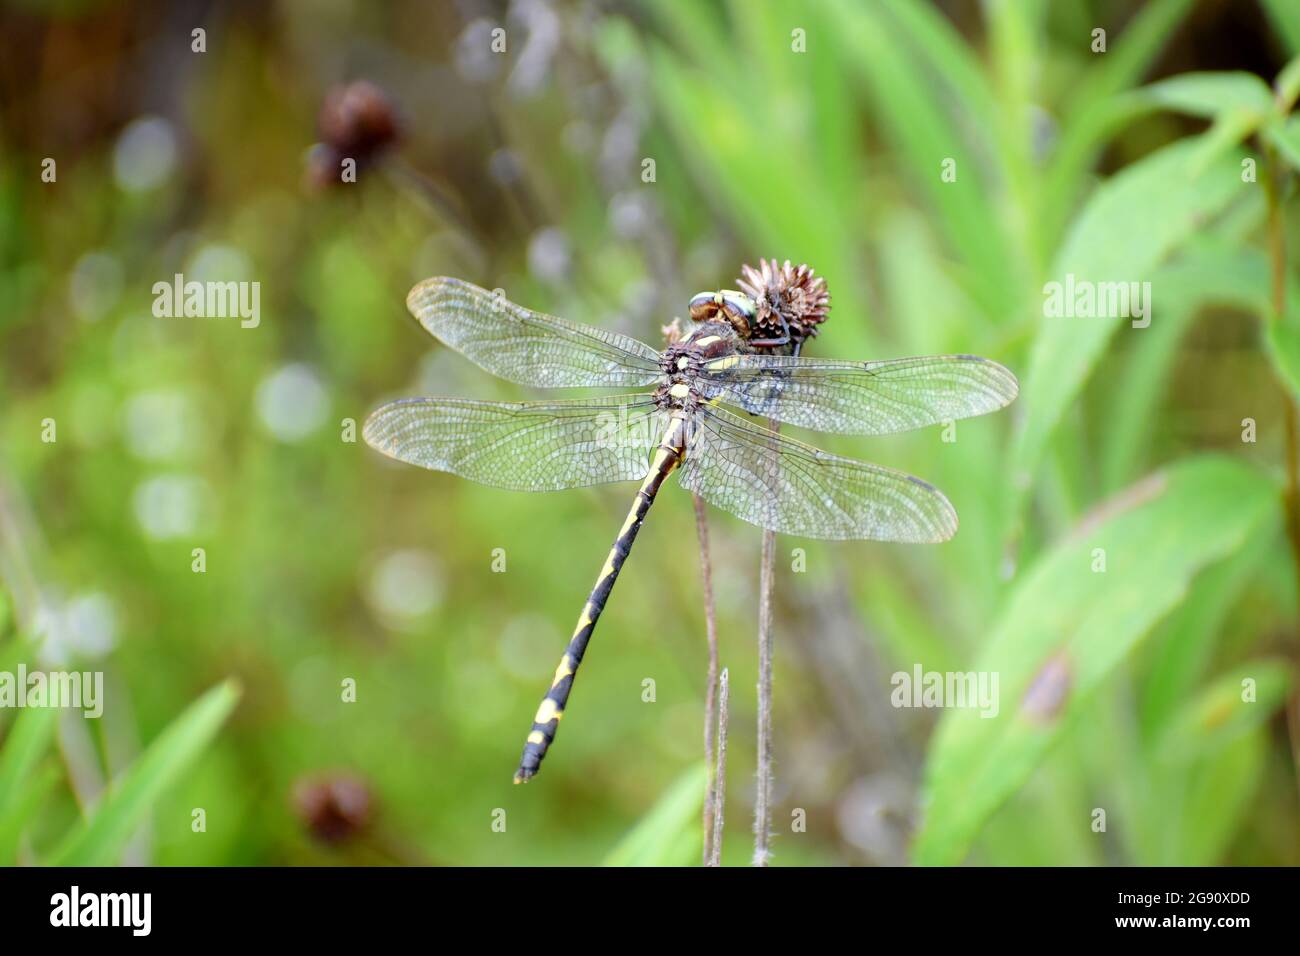 Closeup Western flying Adder Dragonfly / Spike Tail with clear wings resting on foliage in the Ozarks Stock Photo